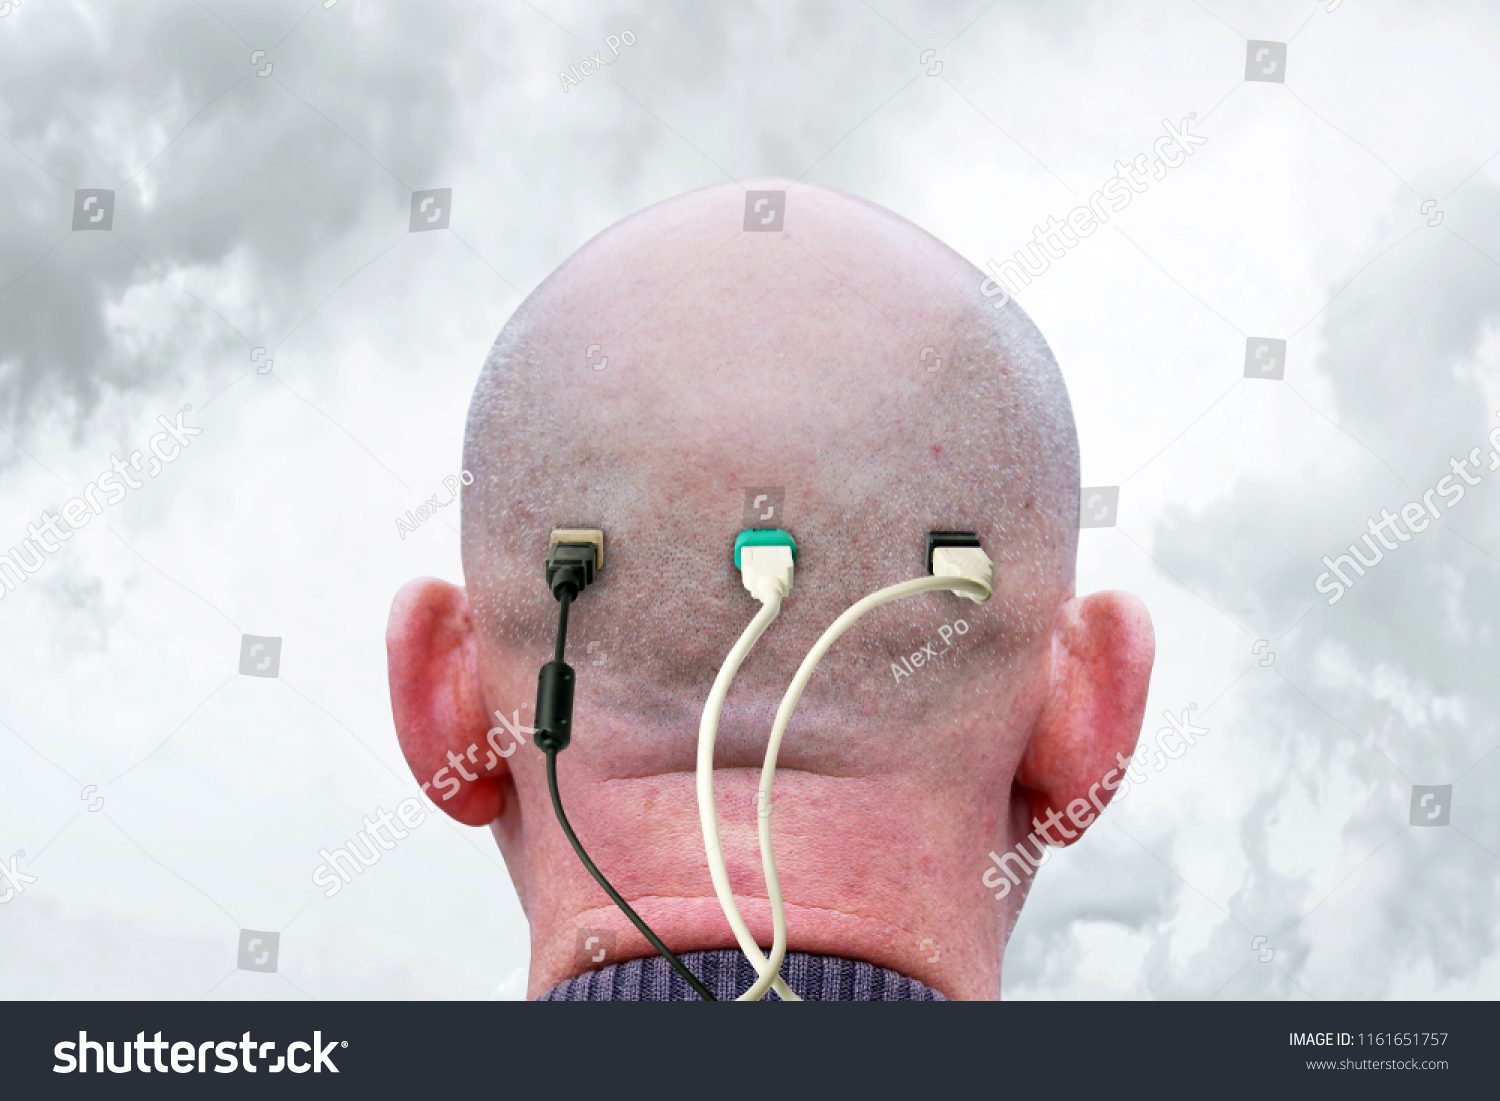 stock-photo-shaved-male-nape-and-a-lot-of-usb-cables-connected-to-it-concept-of-dependence-in-thinking-and-1161651757.jpg